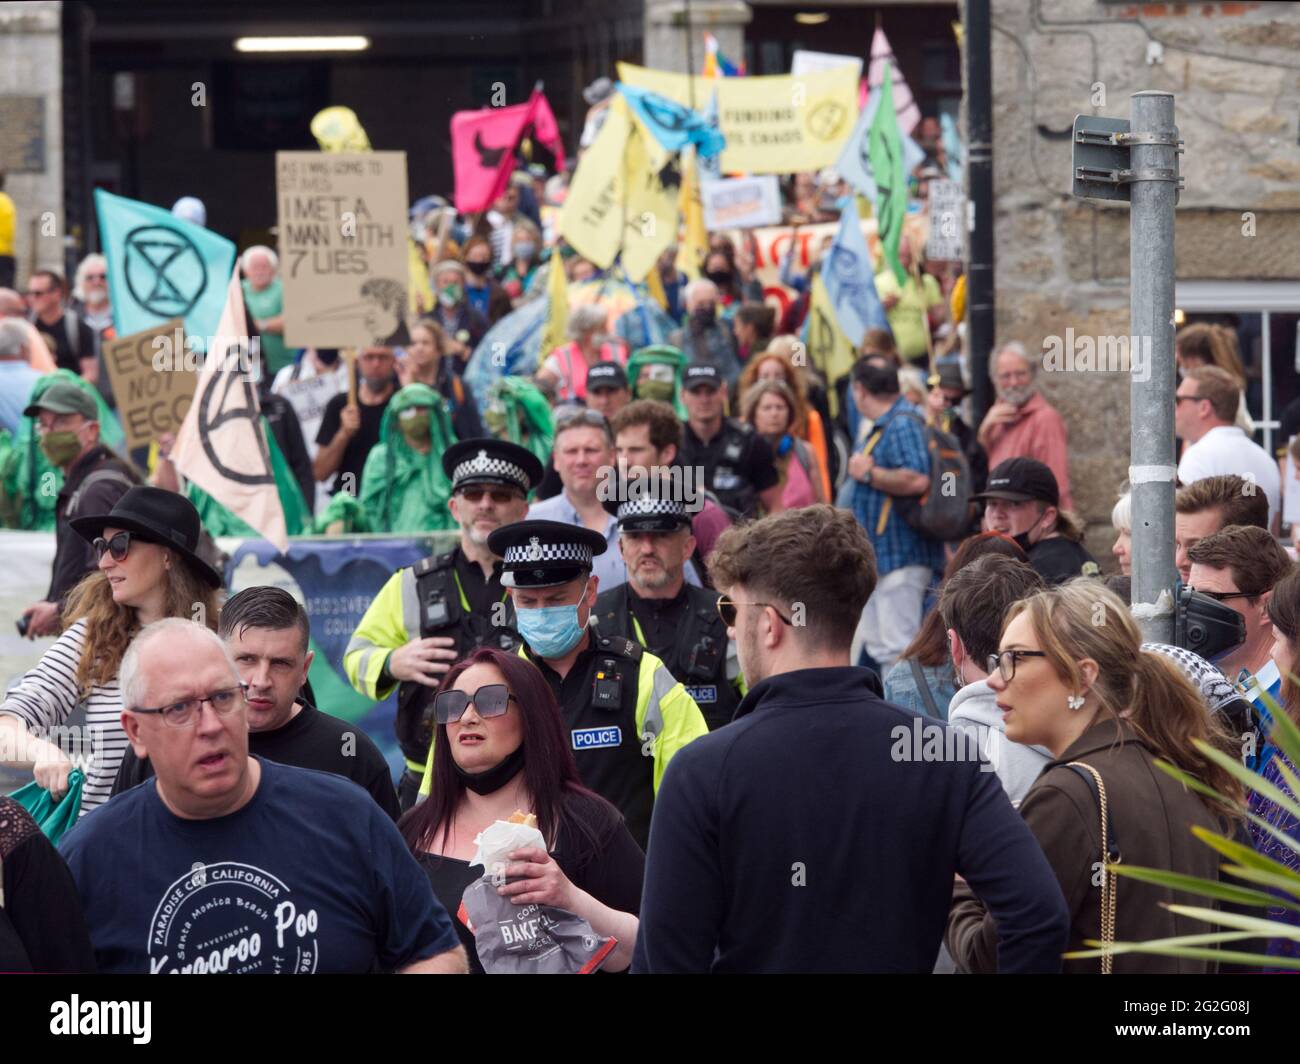 St Ives Cornwall. G7, Extinction Rebellion Group protest on the streets of St Ives. Carbis Bay next door  is housing the leaders of the G7 group. 11th June 2021. Credit: Robert Taylor/Alamy Live News Stock Photo